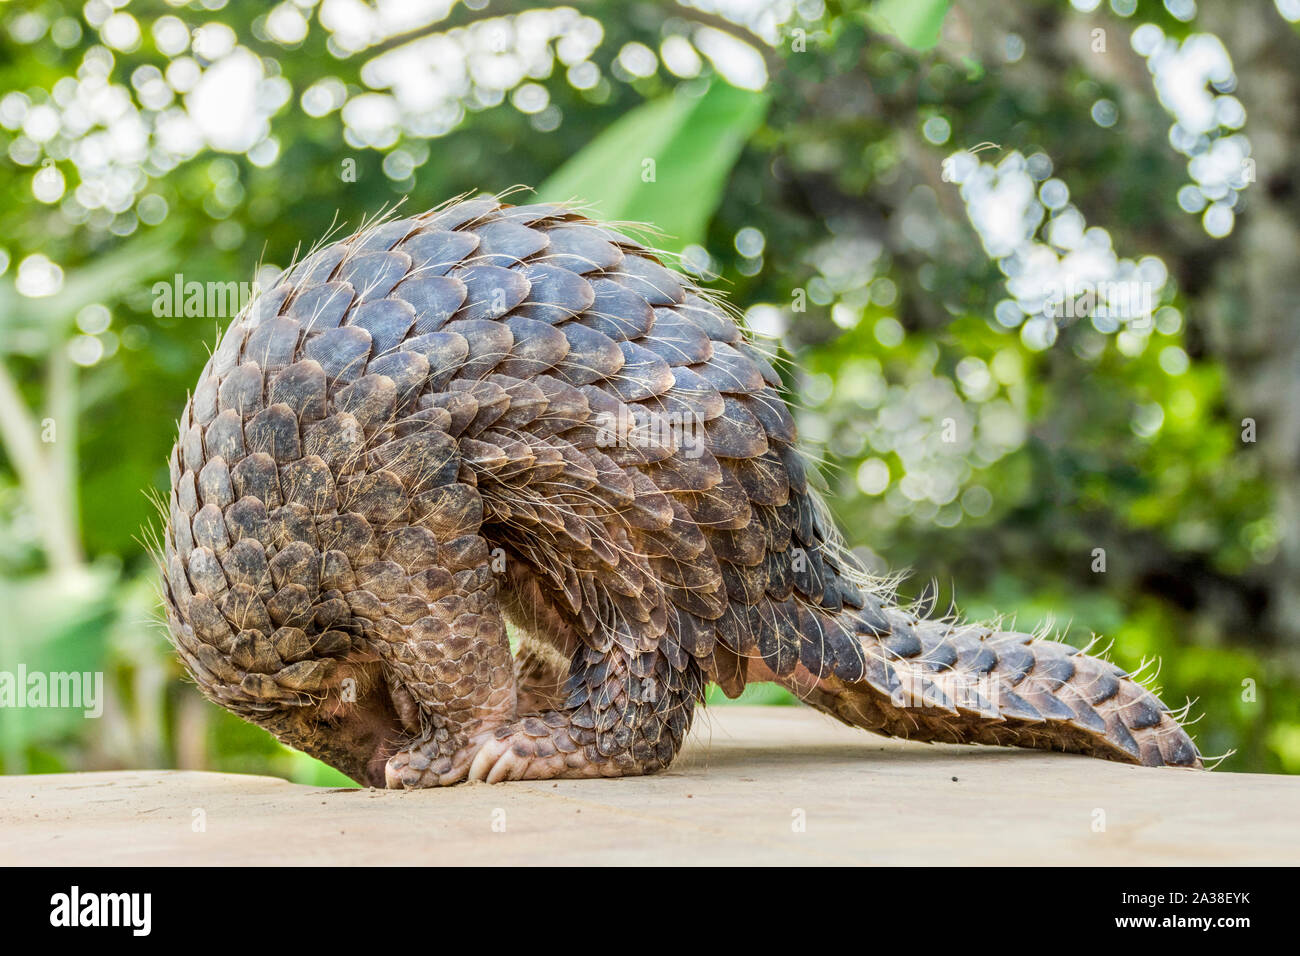 Close-up of a pangolin standing up on a wall, Indonesia Stock Photo